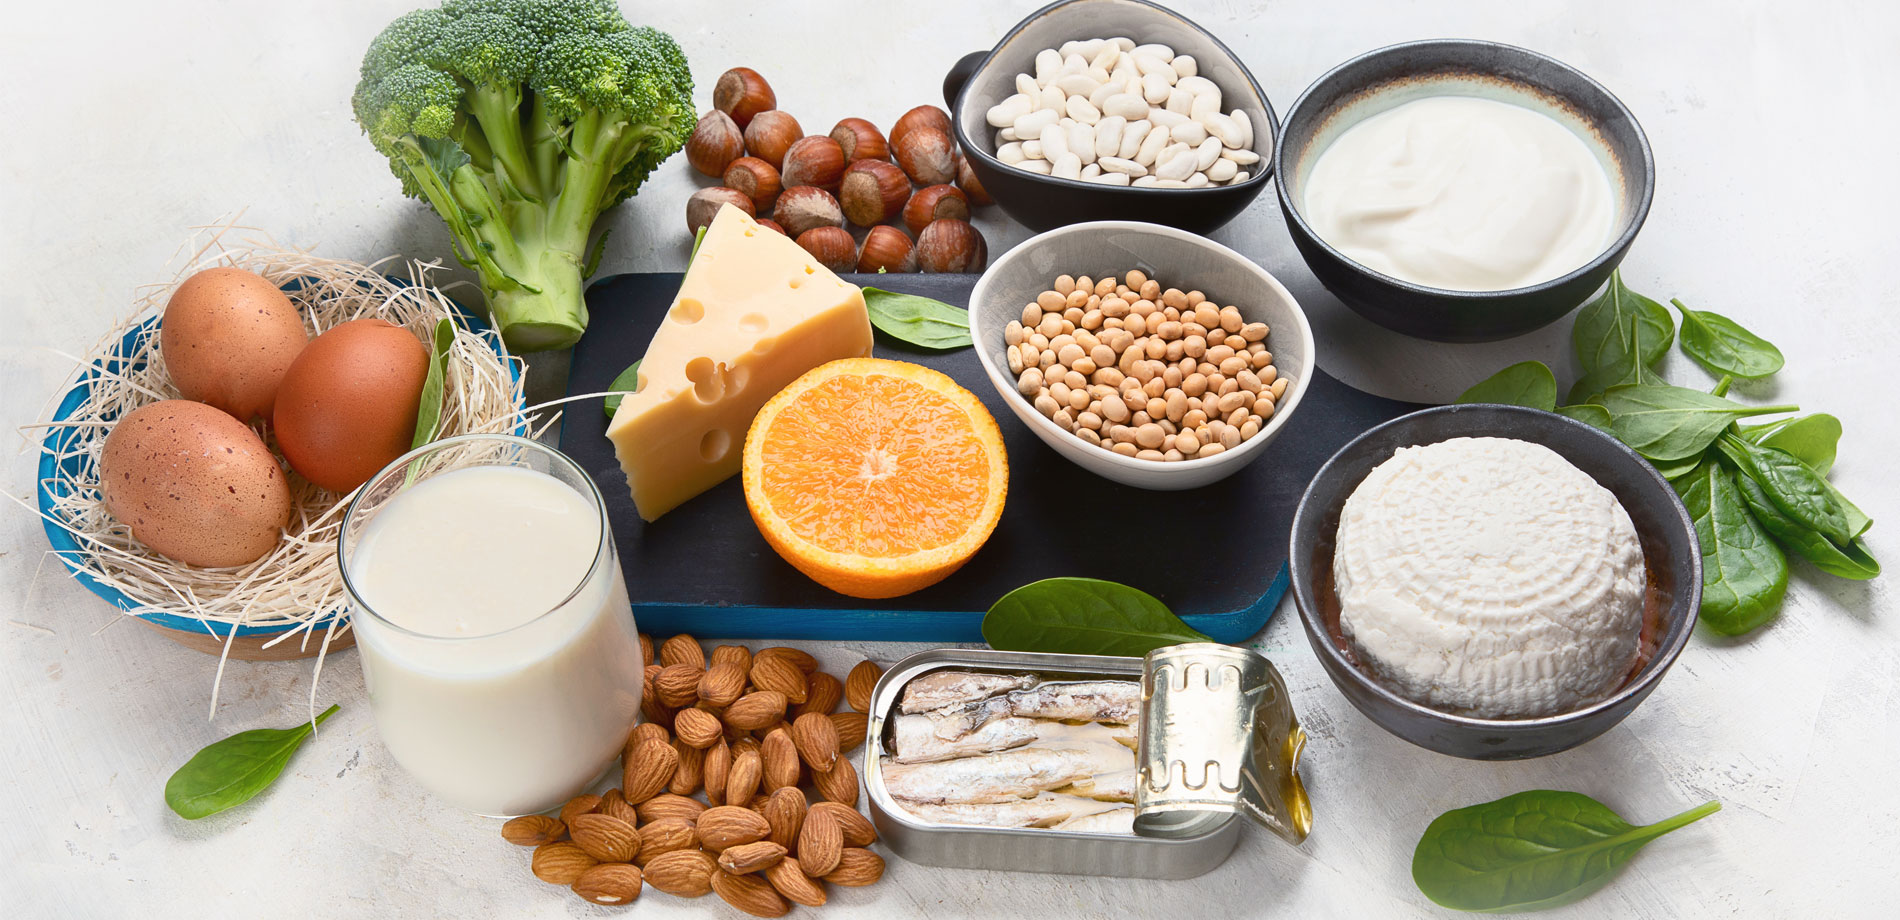 Calcium: How Much Do I Need and What’s the Best Way to Get It?